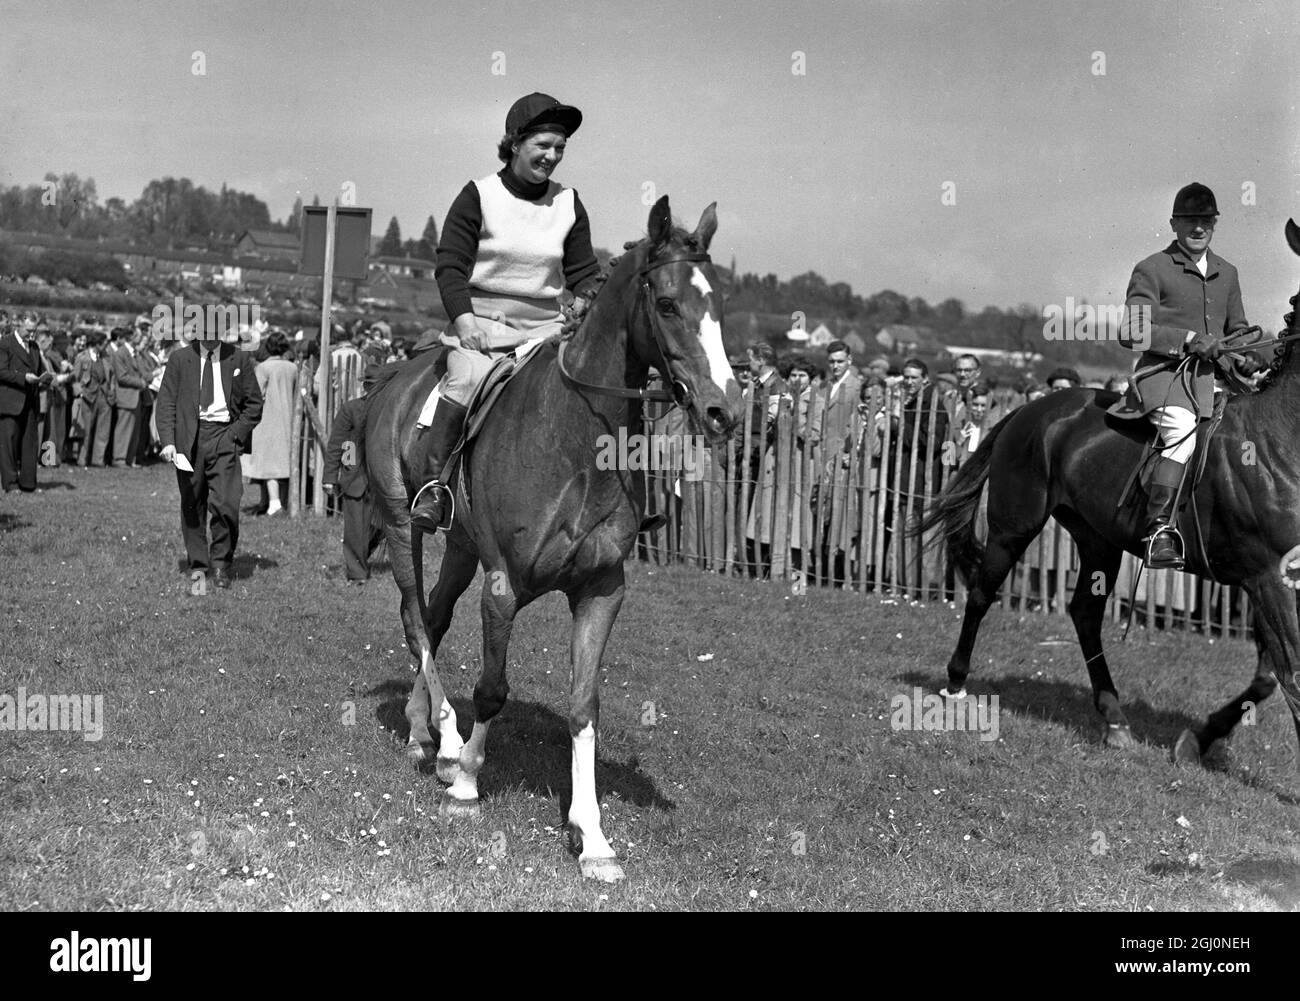 9 May 1954 Mrs. G. Lamont on Dean of Devon who won the Pendarves Paynter Trophy, Adjacent Hunts' Ladies Race at the Old Surrey and Burstow Hunt point-to-point races at Spitals Cross, Edenbridge, Kent, England. TopFoto.co.uk Stock Photo